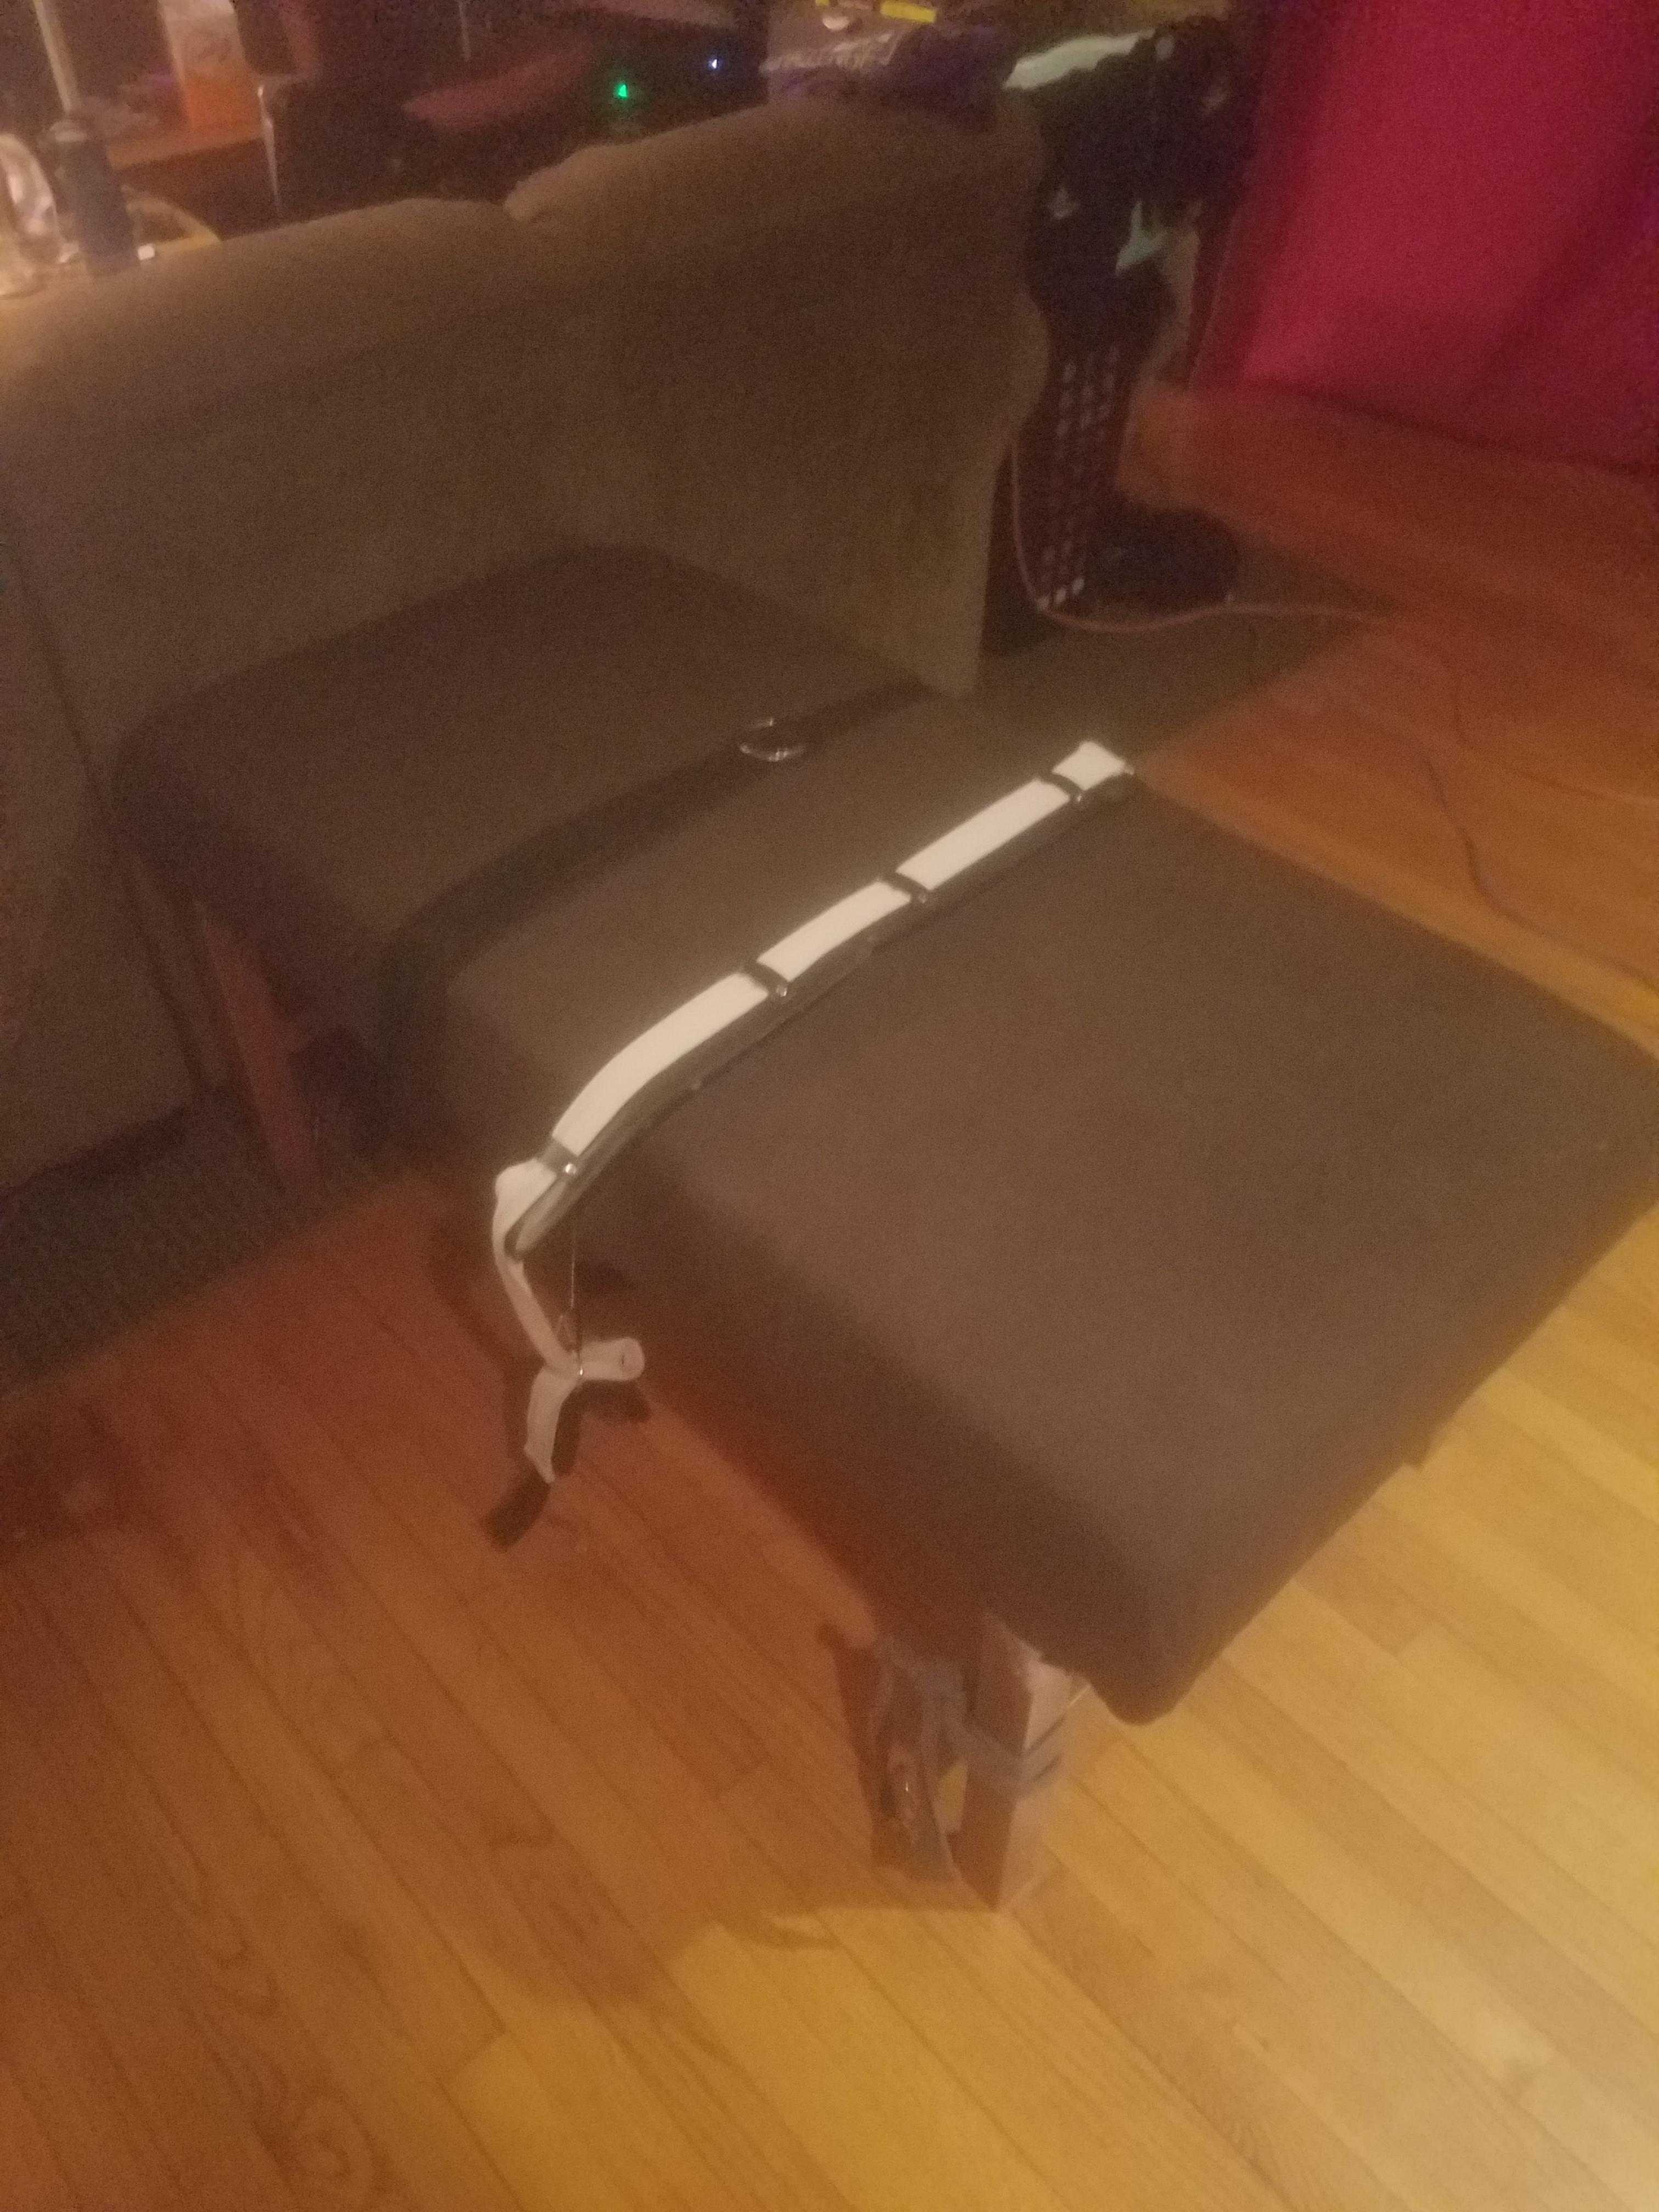 Fuck Bench!! Had a really sturdy coffee table in my basement I just upholster it and added some tie down points. Super excited to tie down and fuck my goddess tonight.